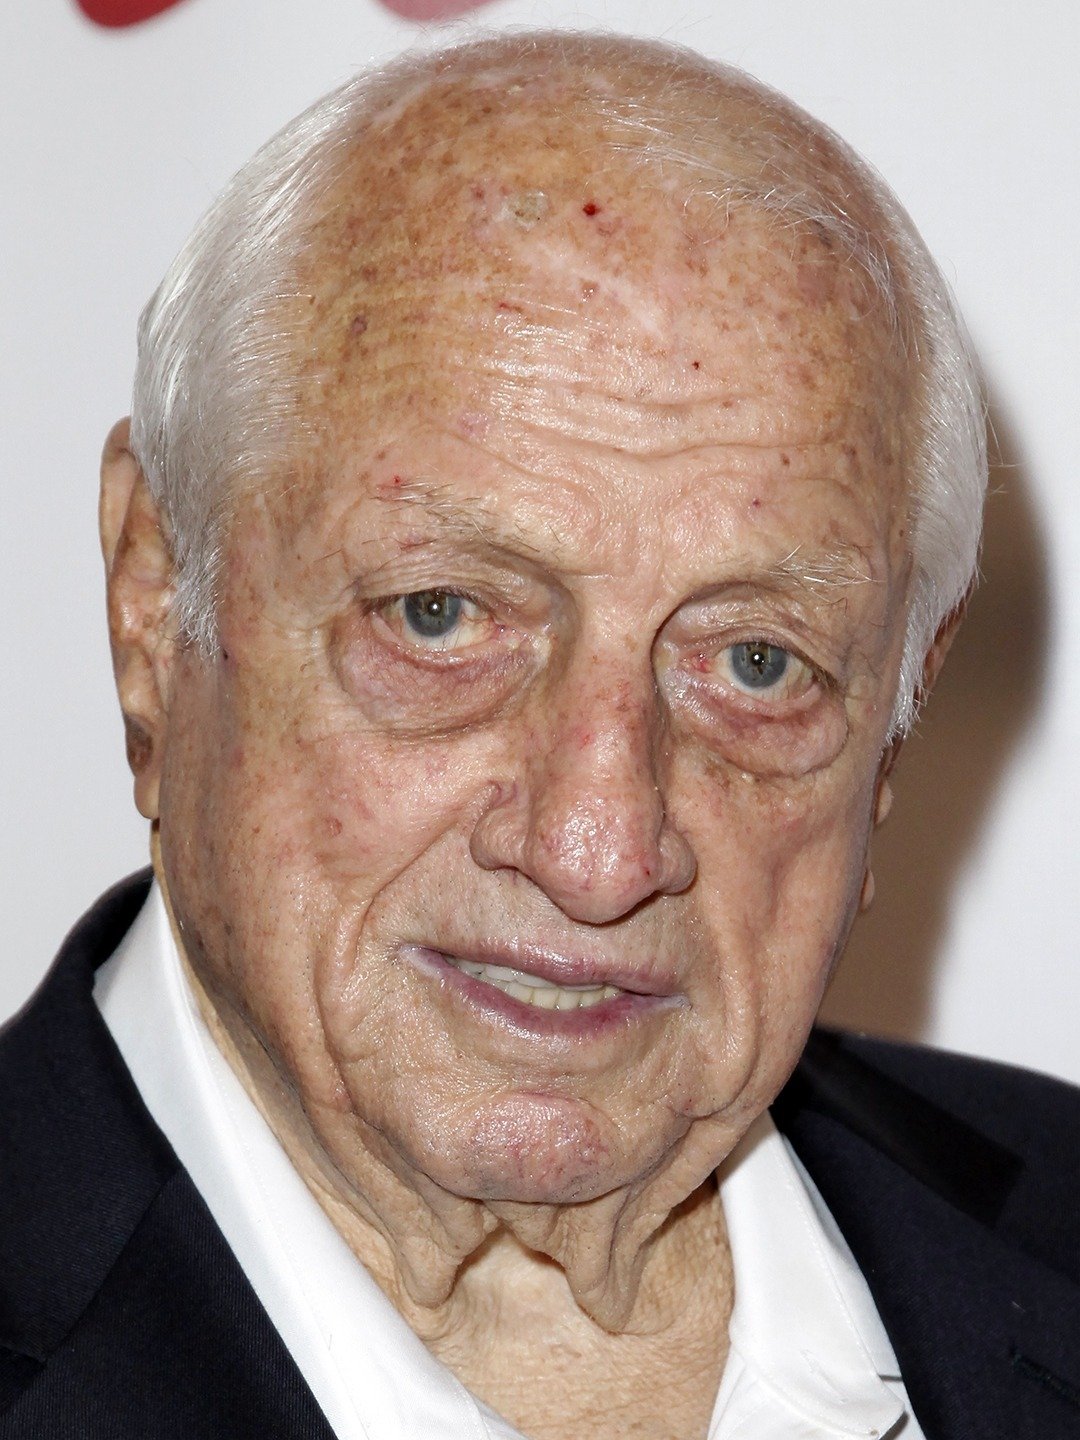 Tommy Lasorda's best and funniest moments